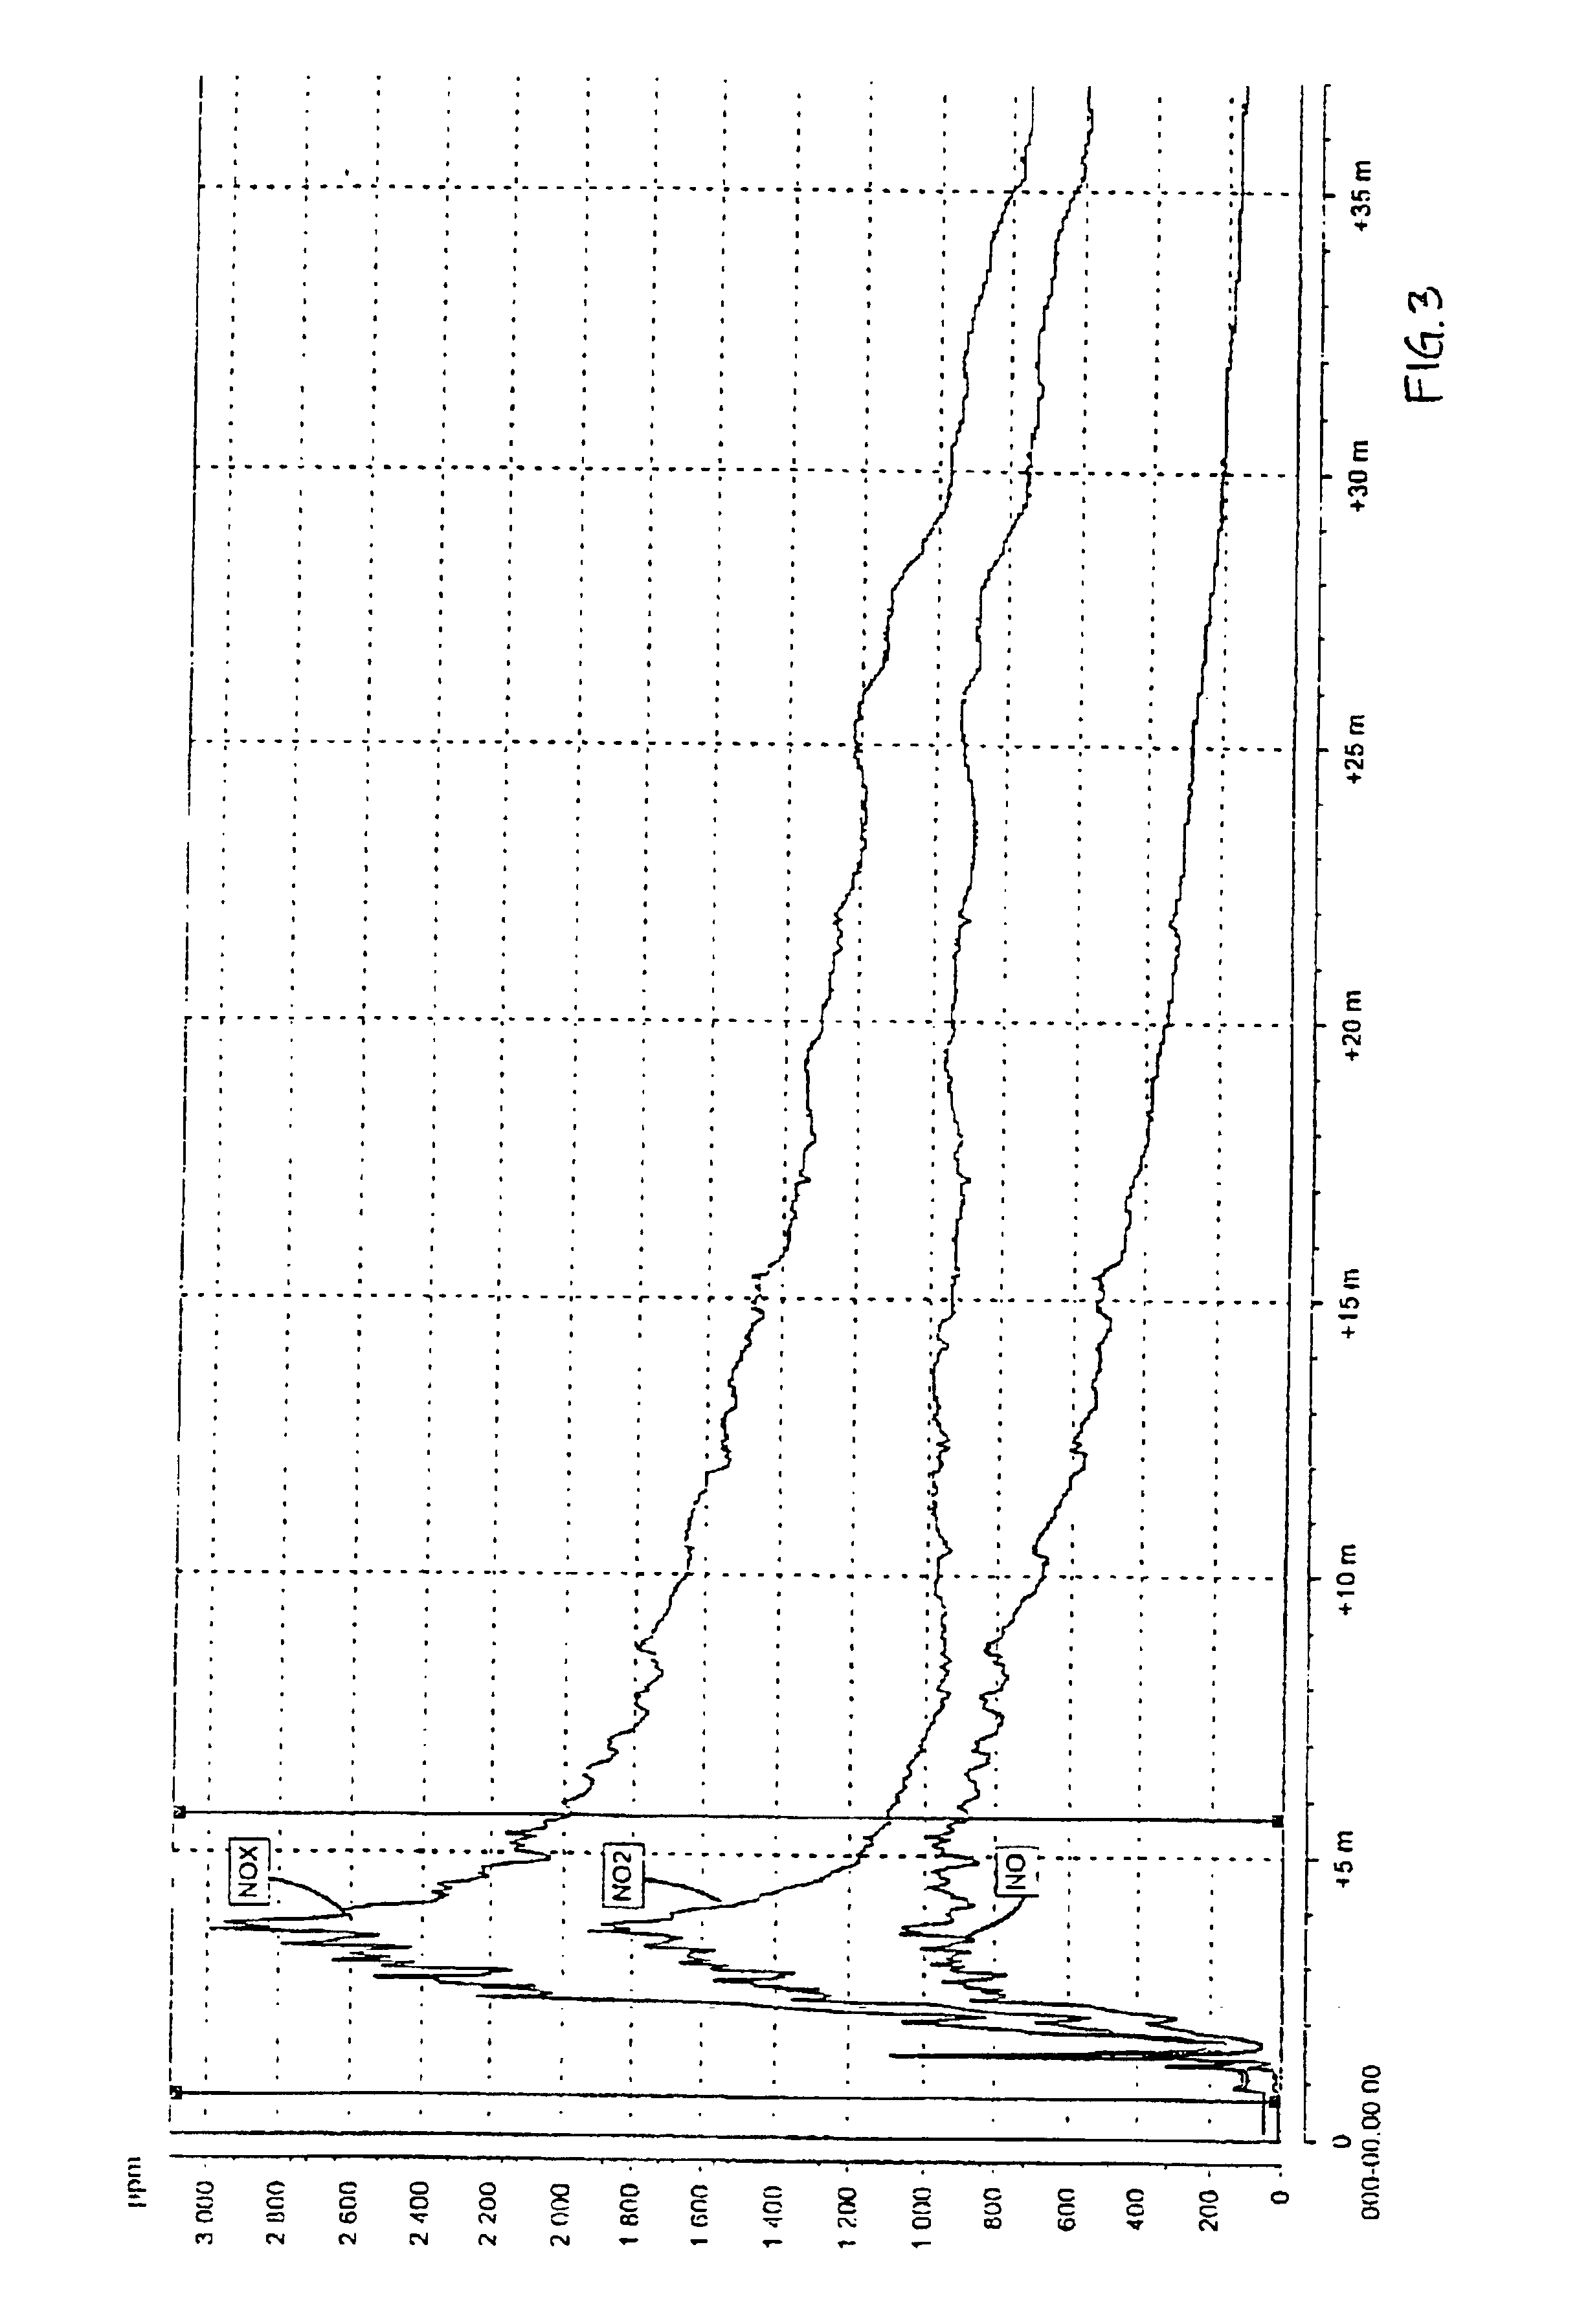 Pickling agent containing urea and method of producing it